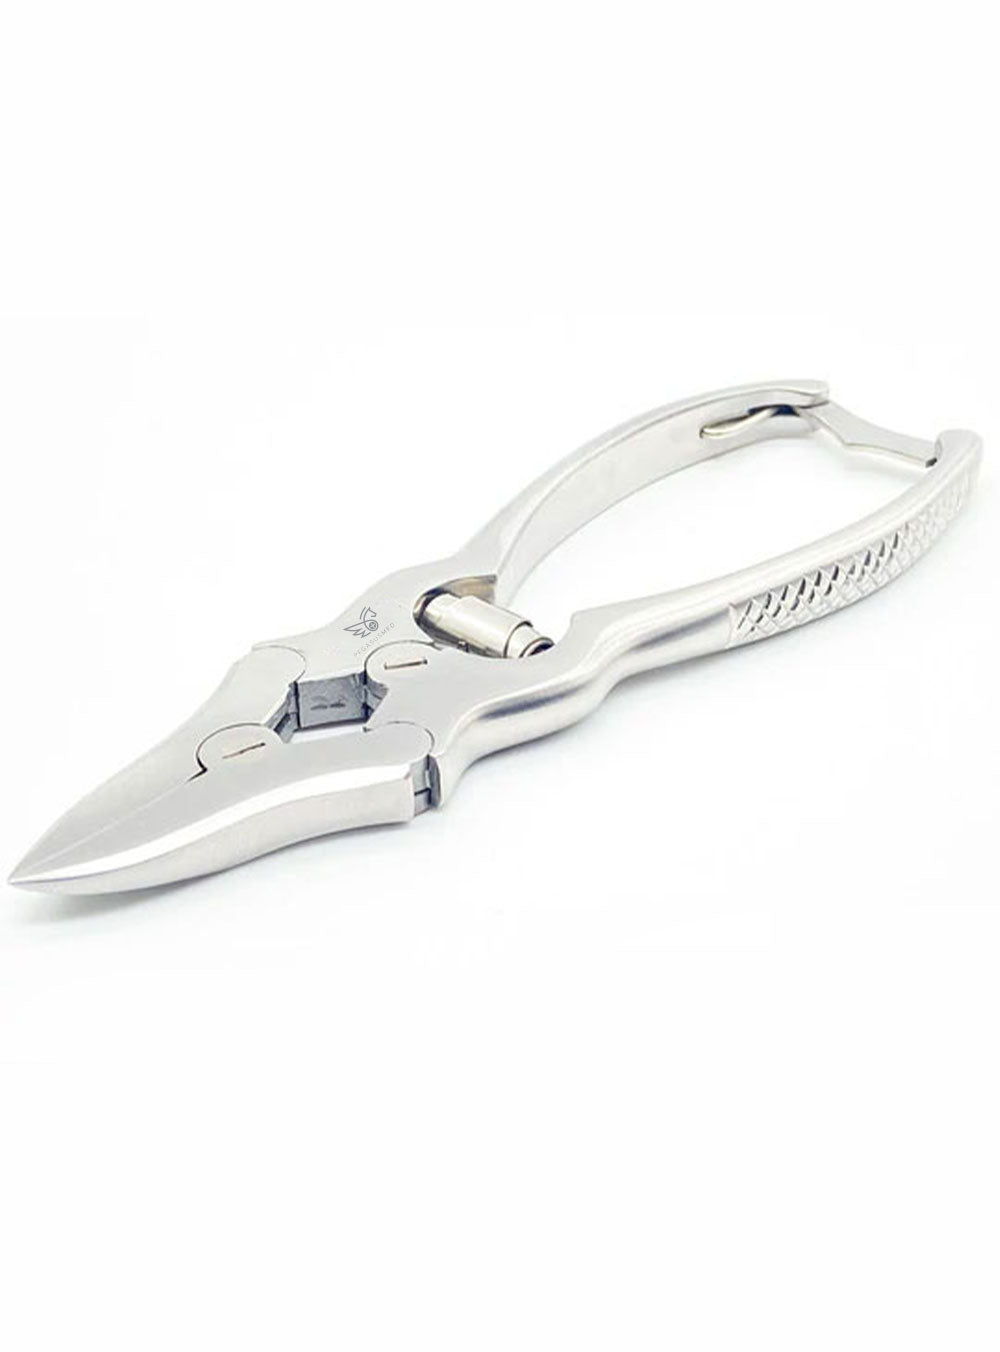 Cantilever Nipper | Straight Blade Podiatry Pedicure Tools